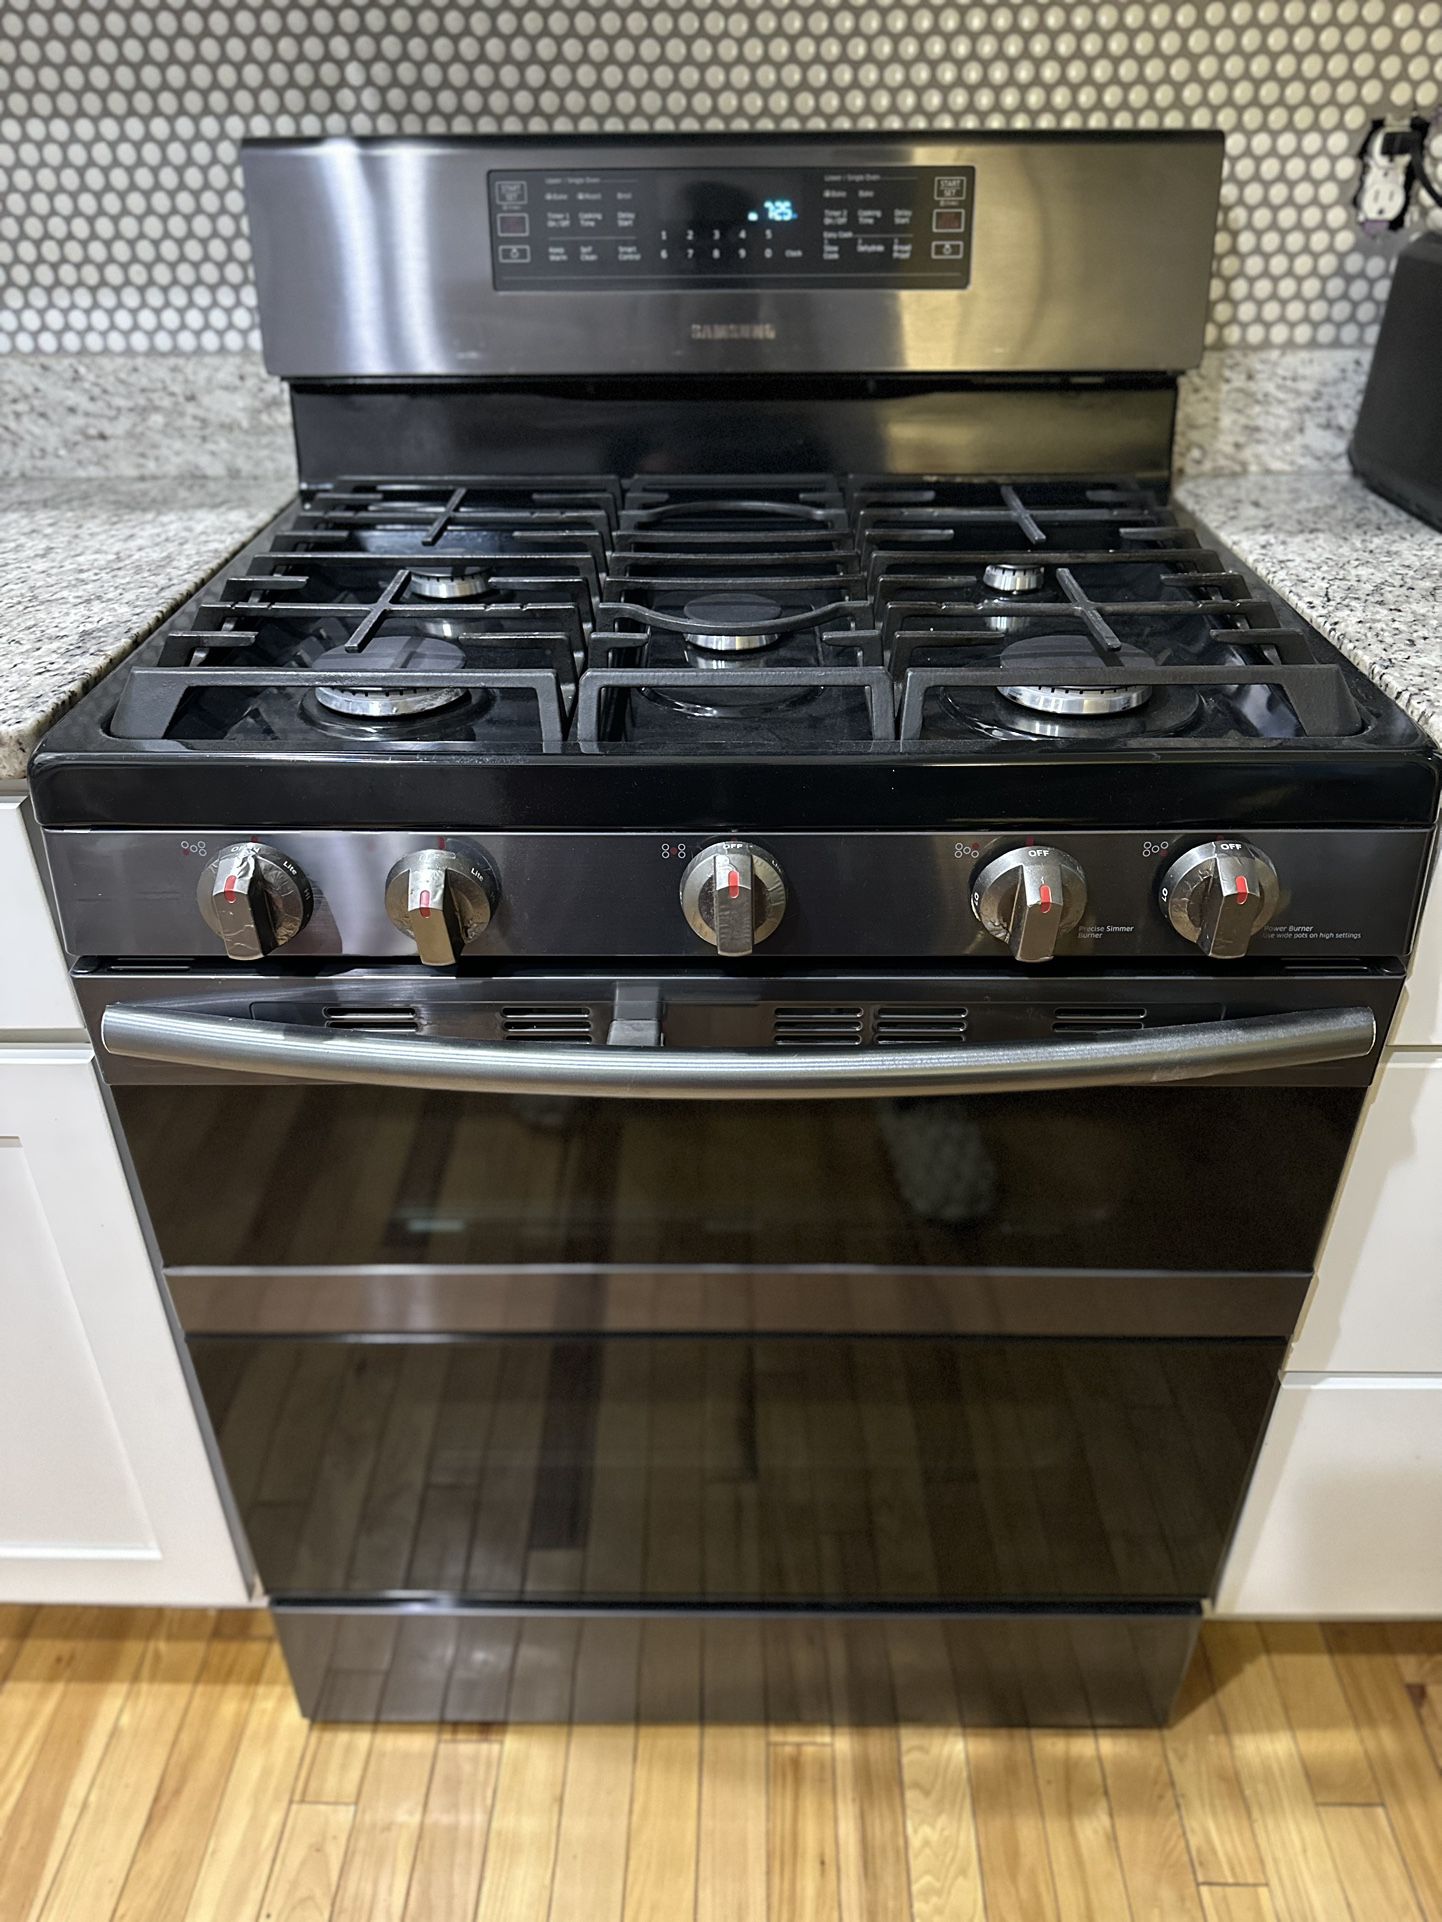 Samsung Double Oven - Black Stainless Steel